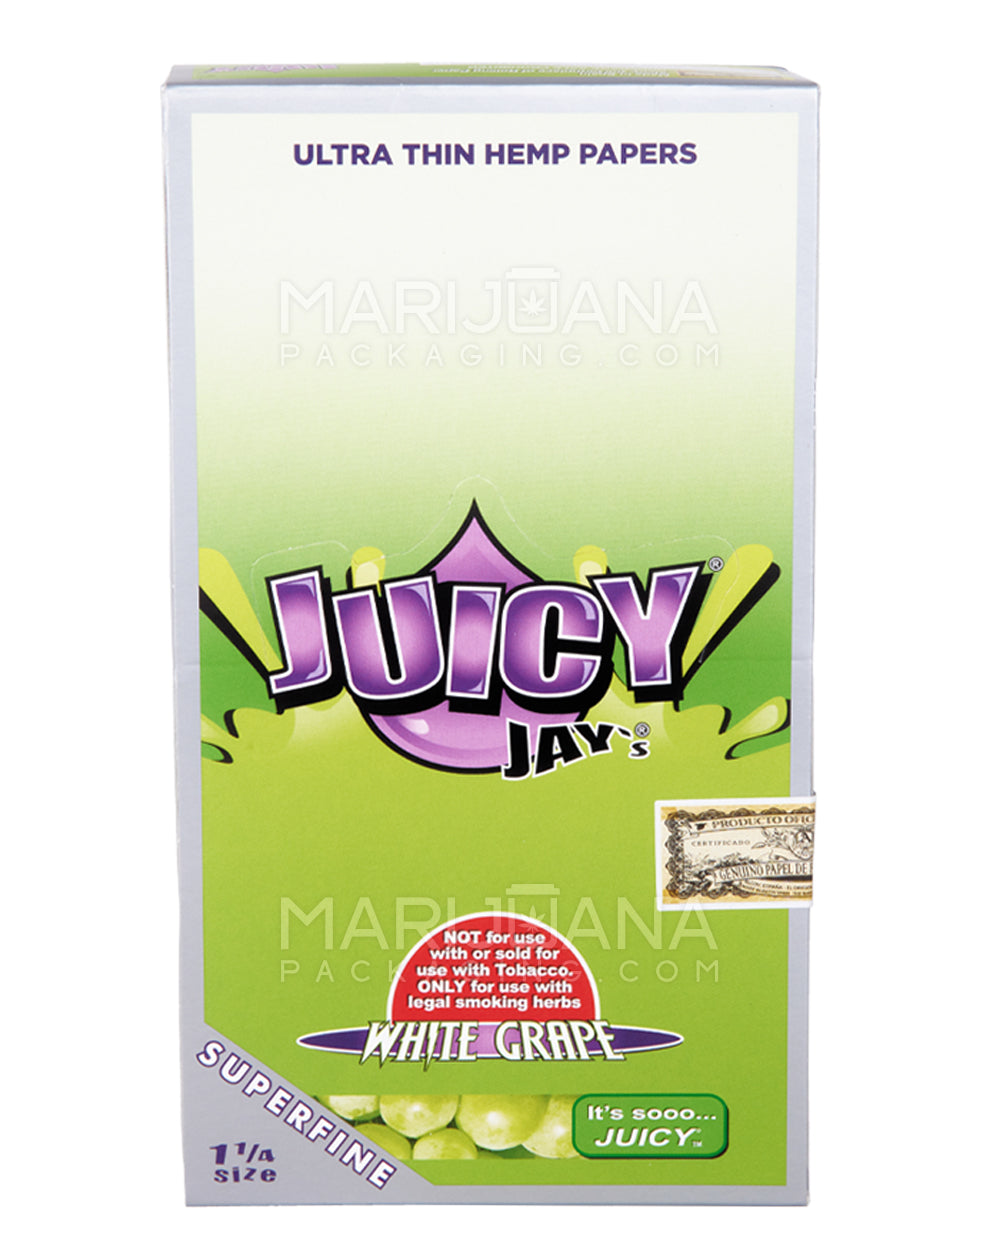 JUICY JAY'S | 'Retail Display' 1 1/4 Size Hemp Rolling Papers | 76mm - White Grape - 24 Count - 2